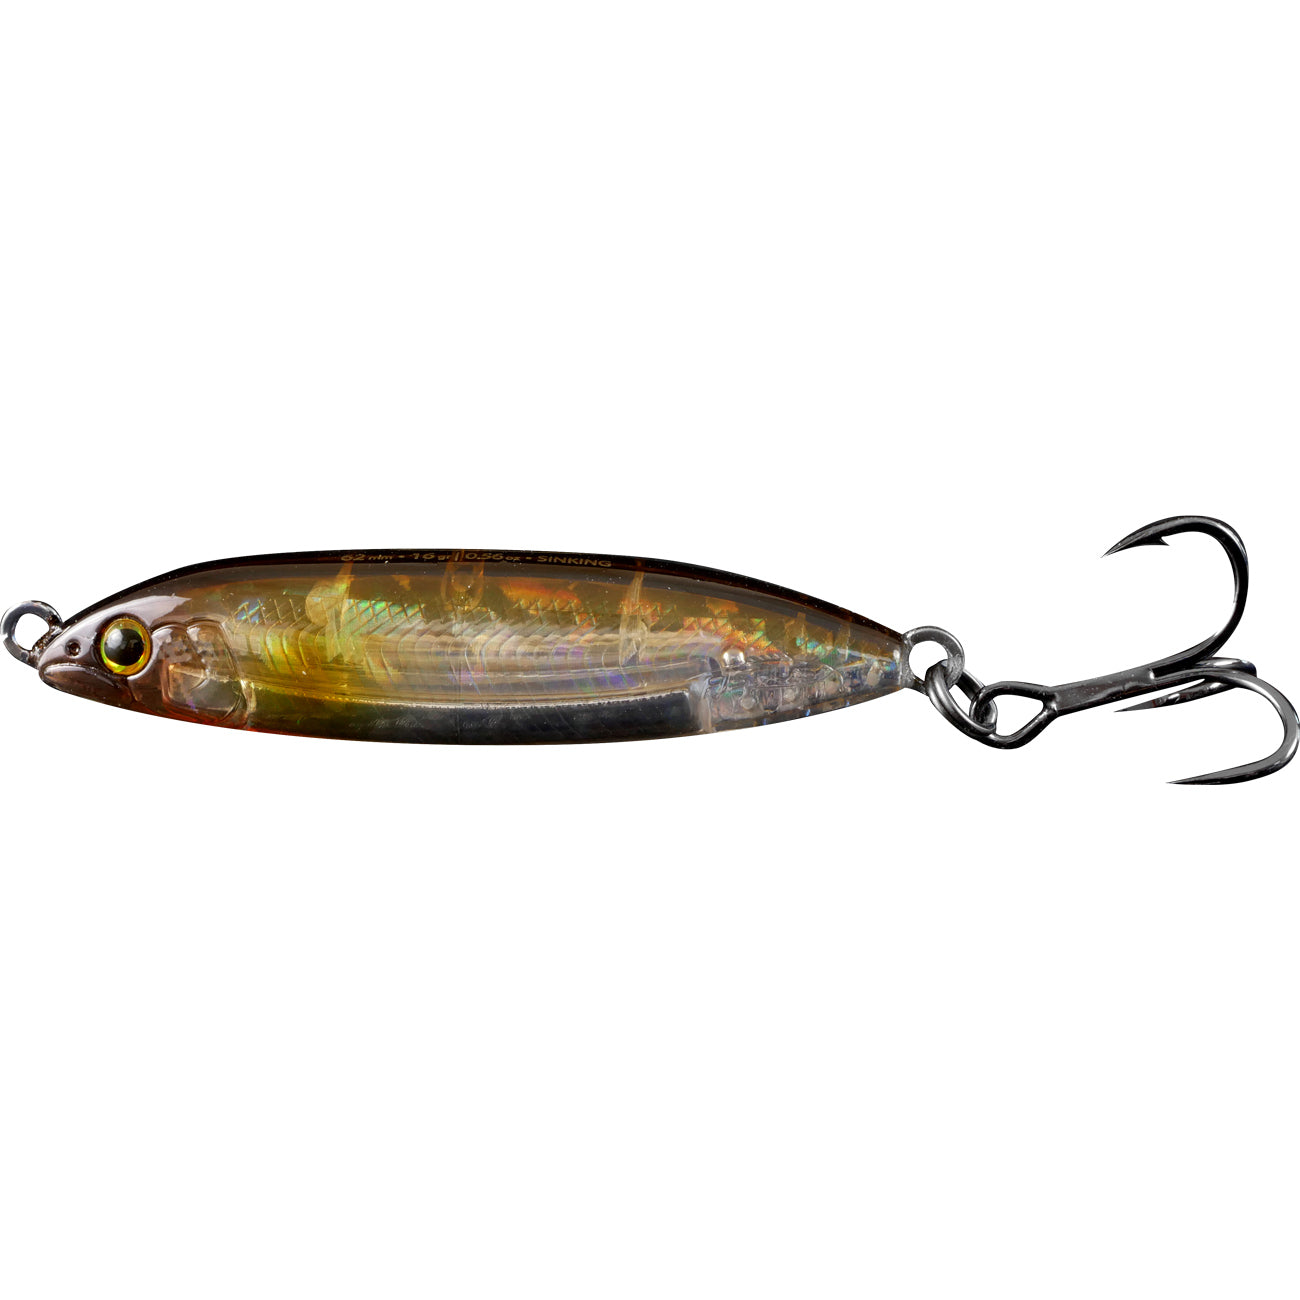 Fishus Lures Lurenzo Wobly Fishing Lure 40mm 5gr